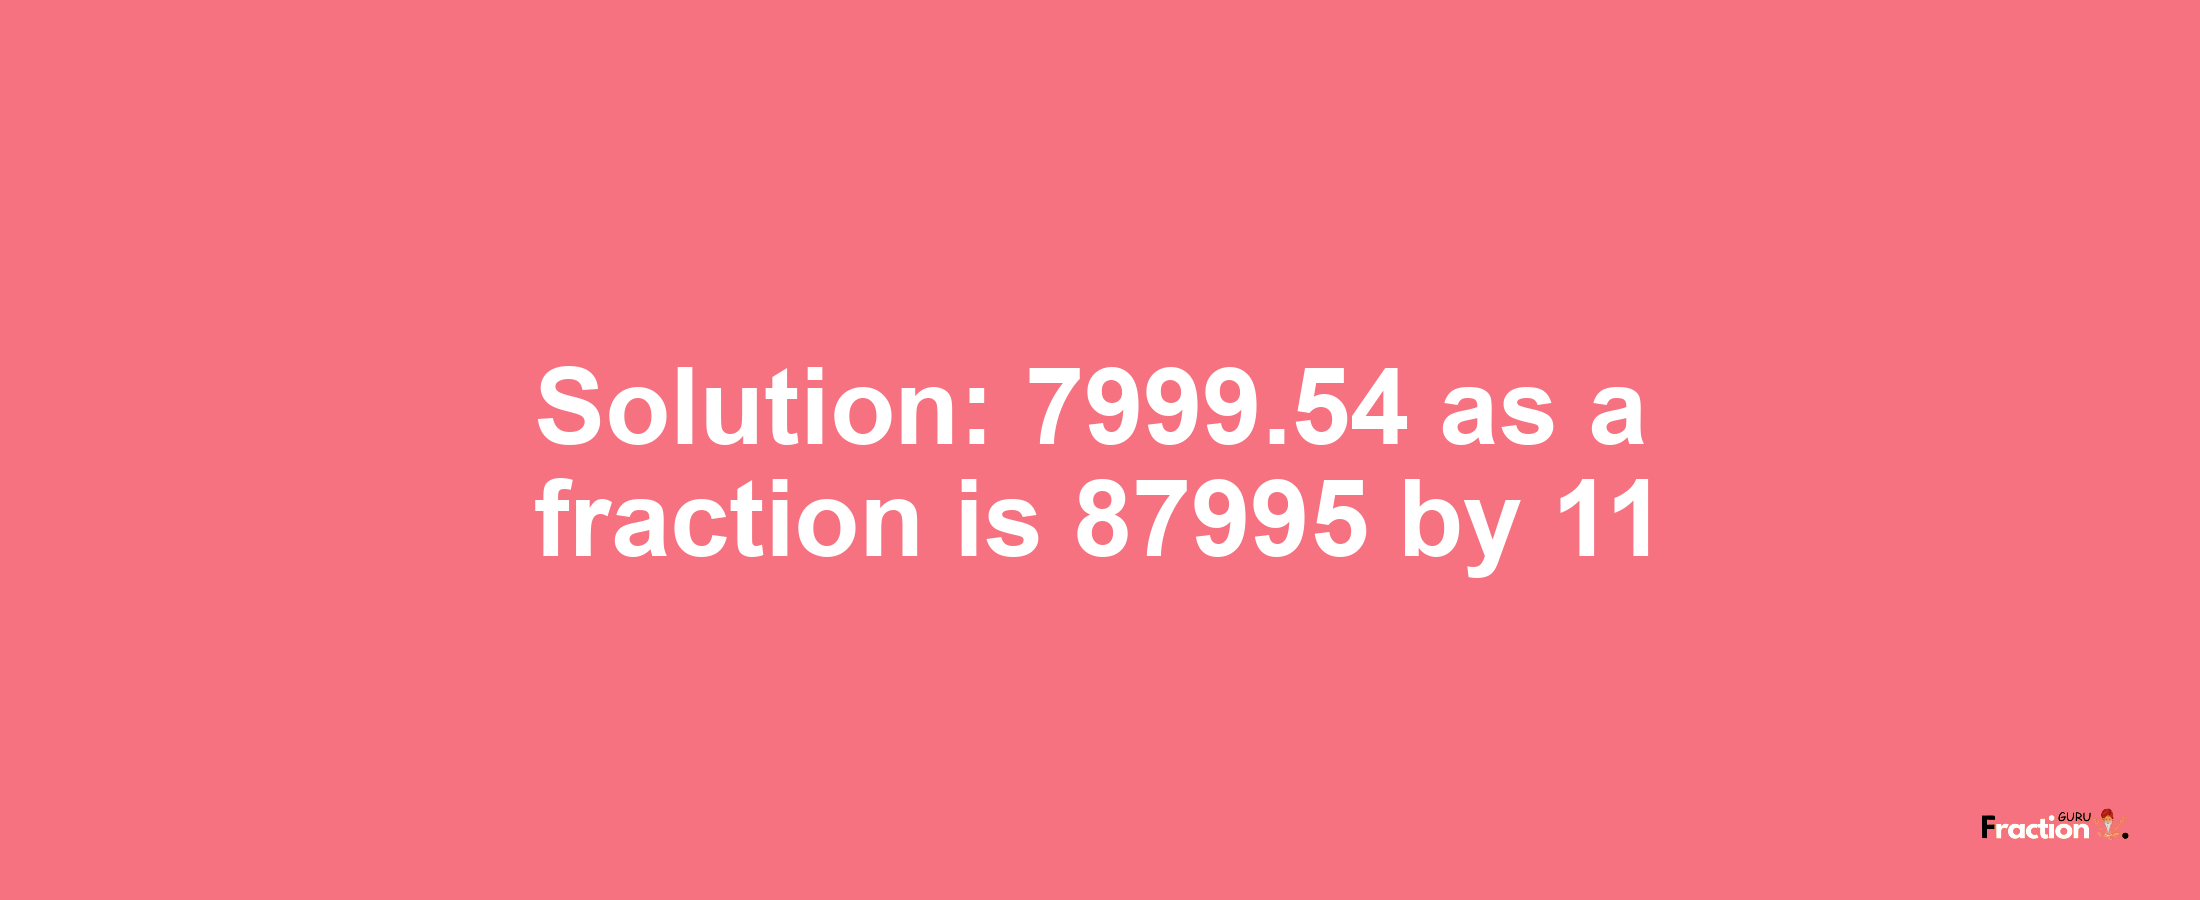 Solution:7999.54 as a fraction is 87995/11